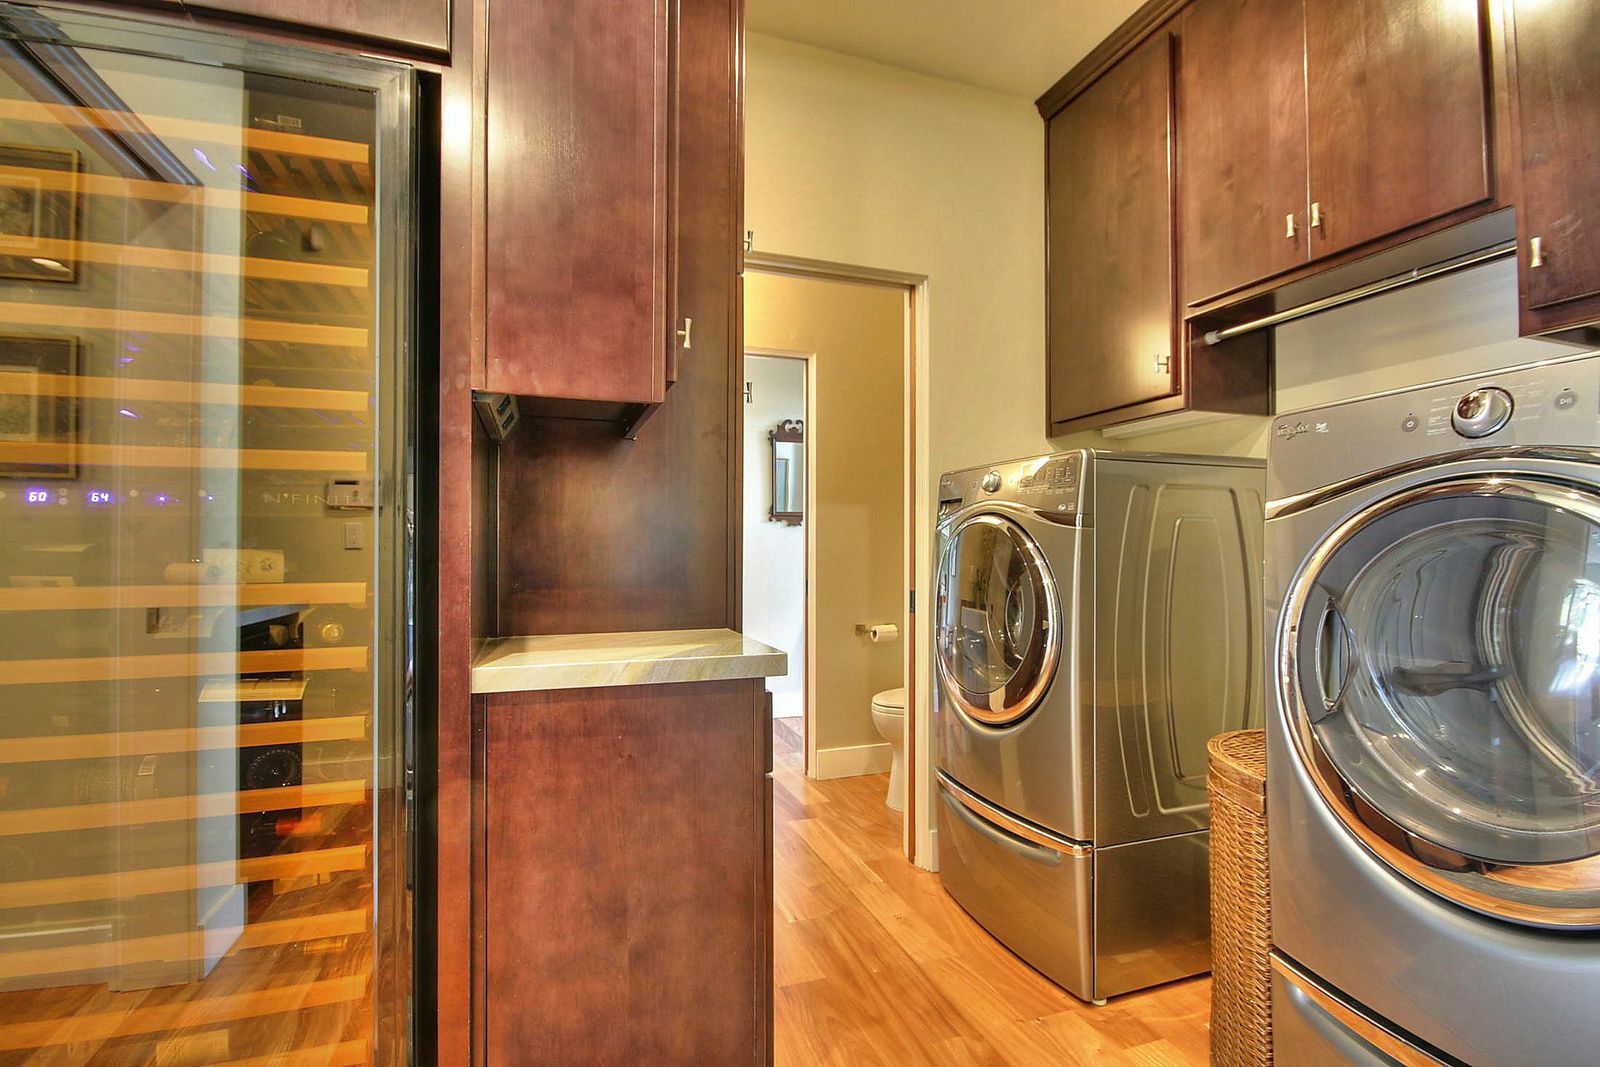 Laundry area with built-in wine refrigerator